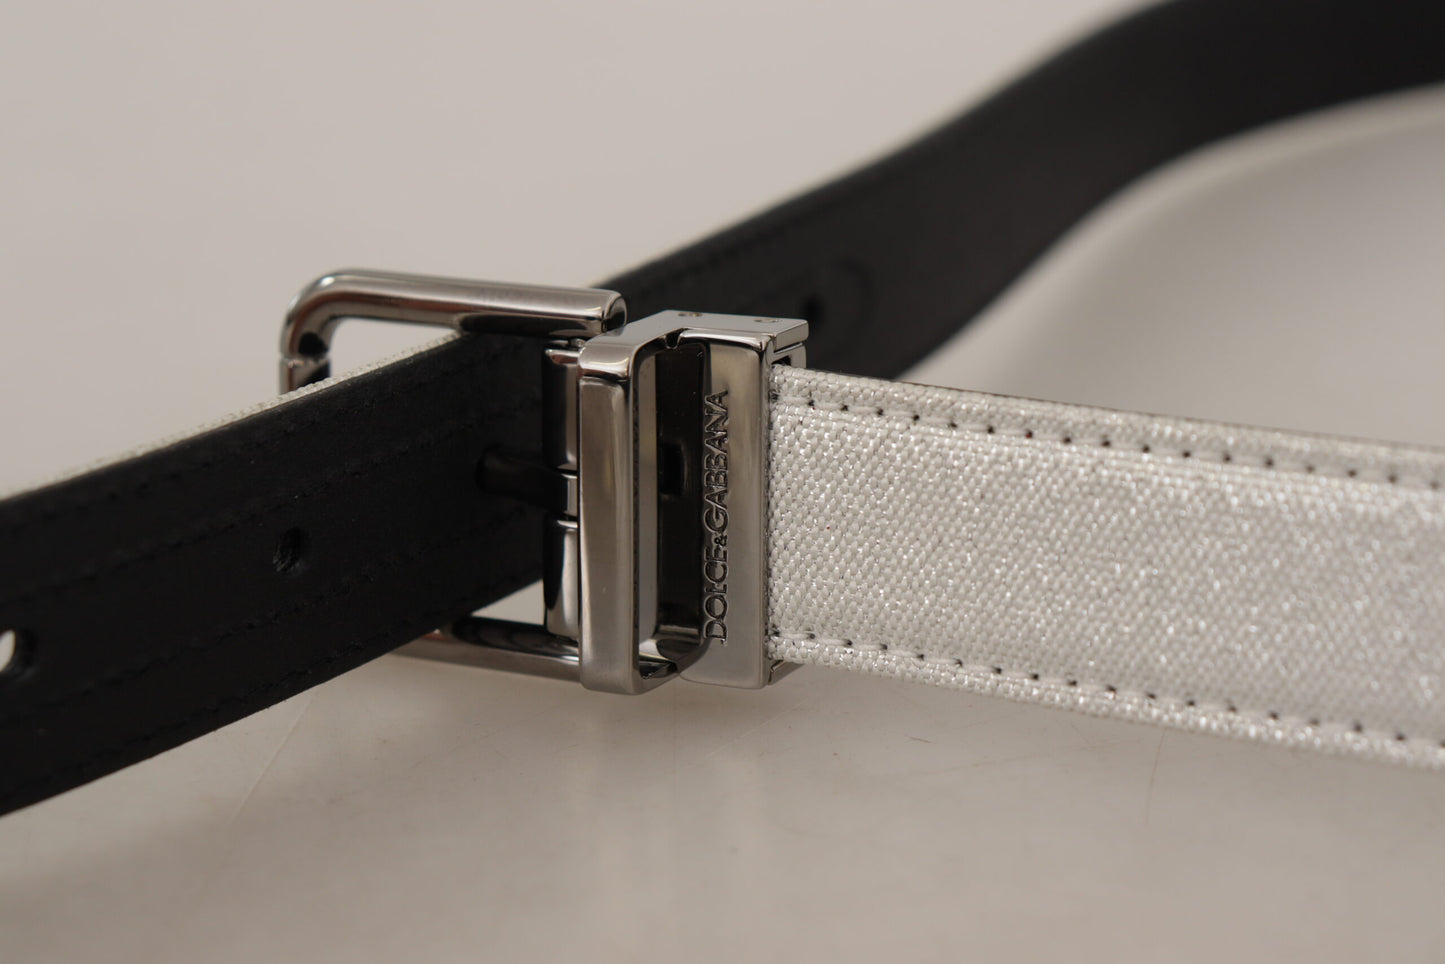 Chic White Leather Belt with Chrome Buckle